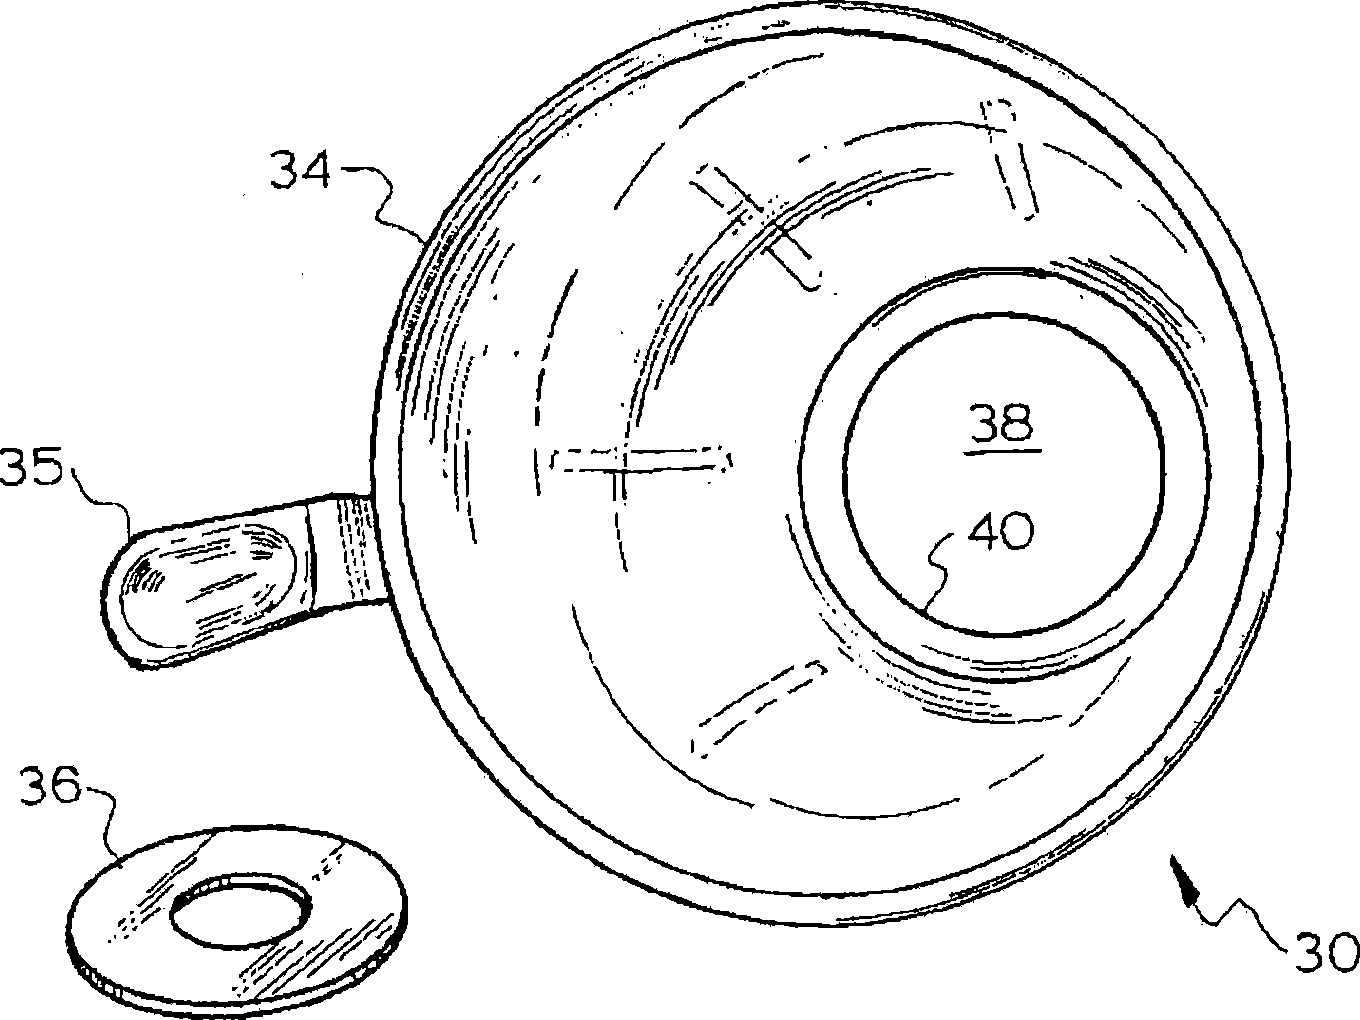 Method and apparatus for making a tea concentrate